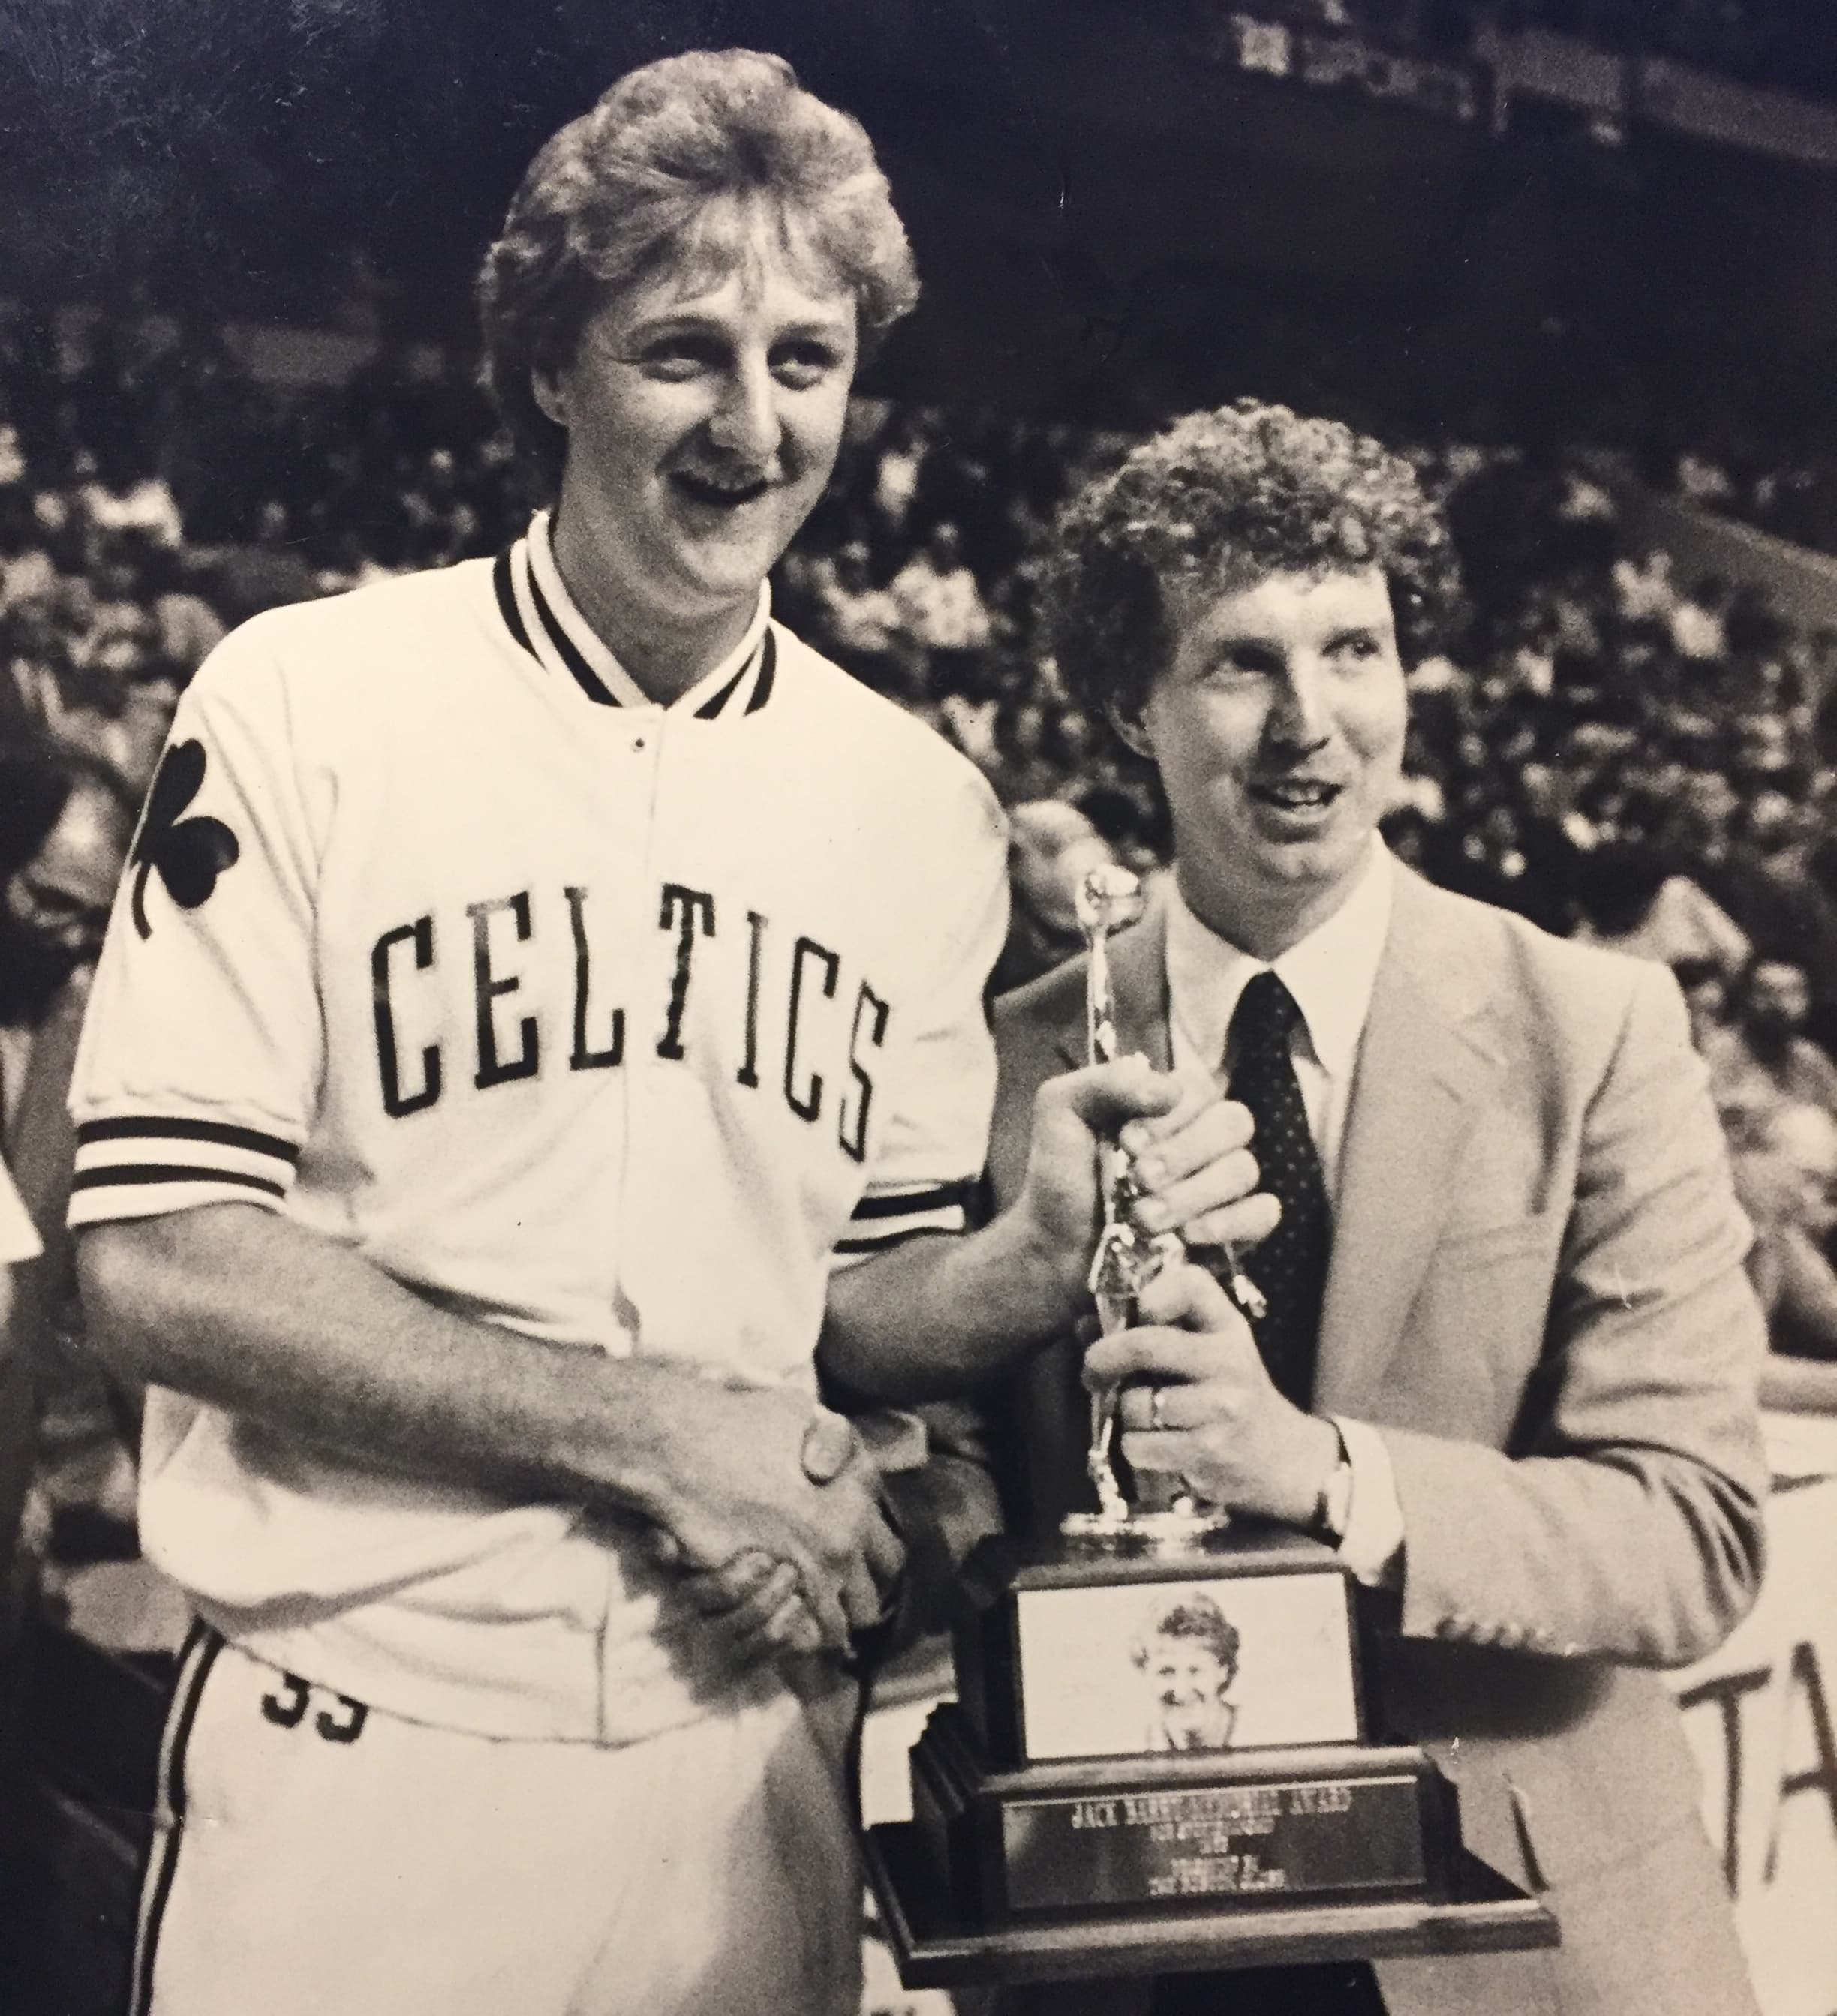 Boston Globe reporter Dan Shaughnessy reflects on covering Larry